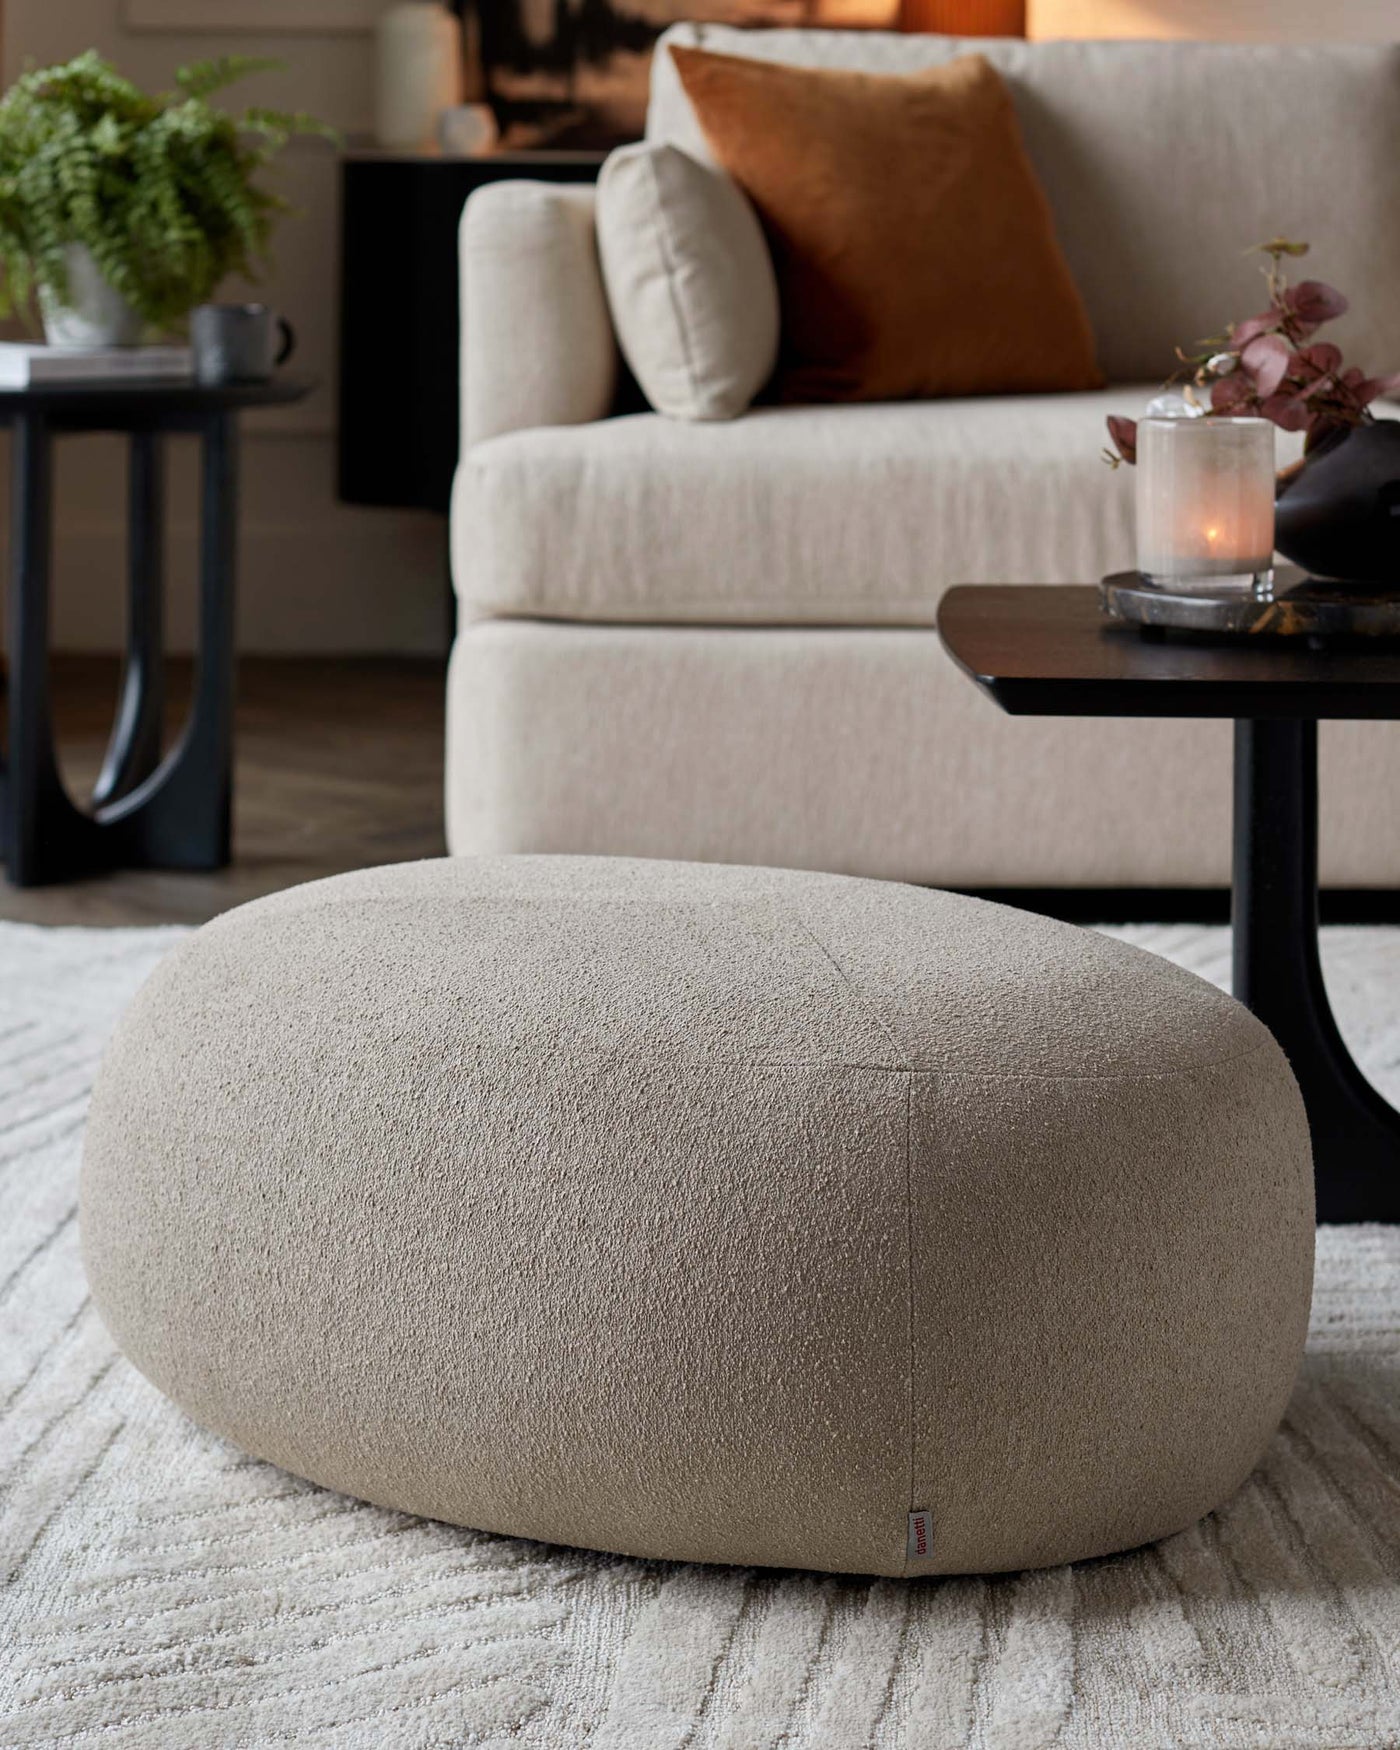 Beige textured oval-shaped ottoman on a white area rug with a beige upholstered sofa, black round side table with a candle, and small green potted plant in a cosy home interior setting.